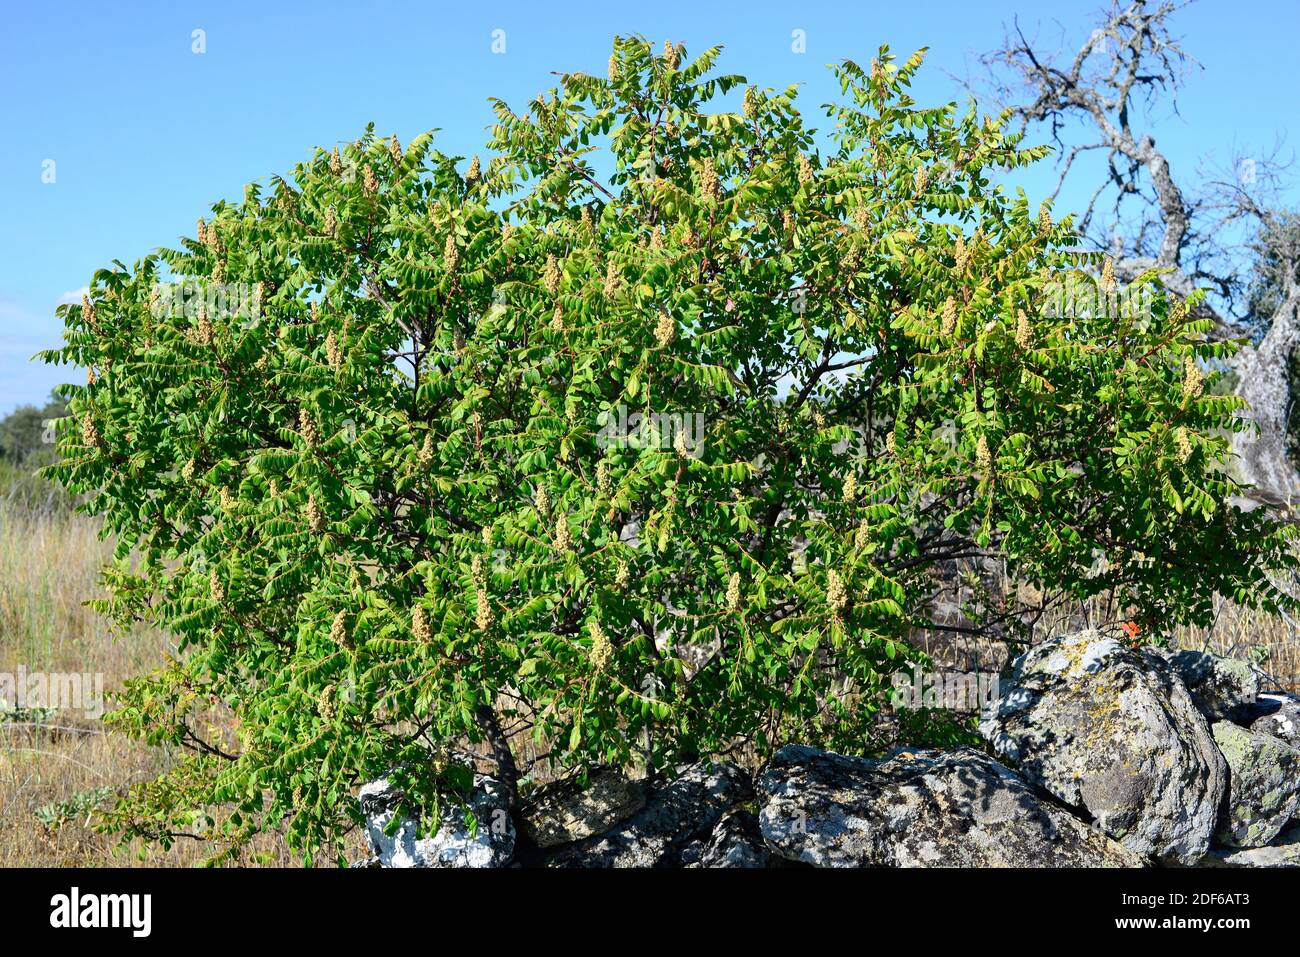 Sicilian sumac or tanner´s sumach (Rhus coriaria) is a deciduous shrub native to southern Europe. Is used for tanning leather. Angiosperms. Stock Photo